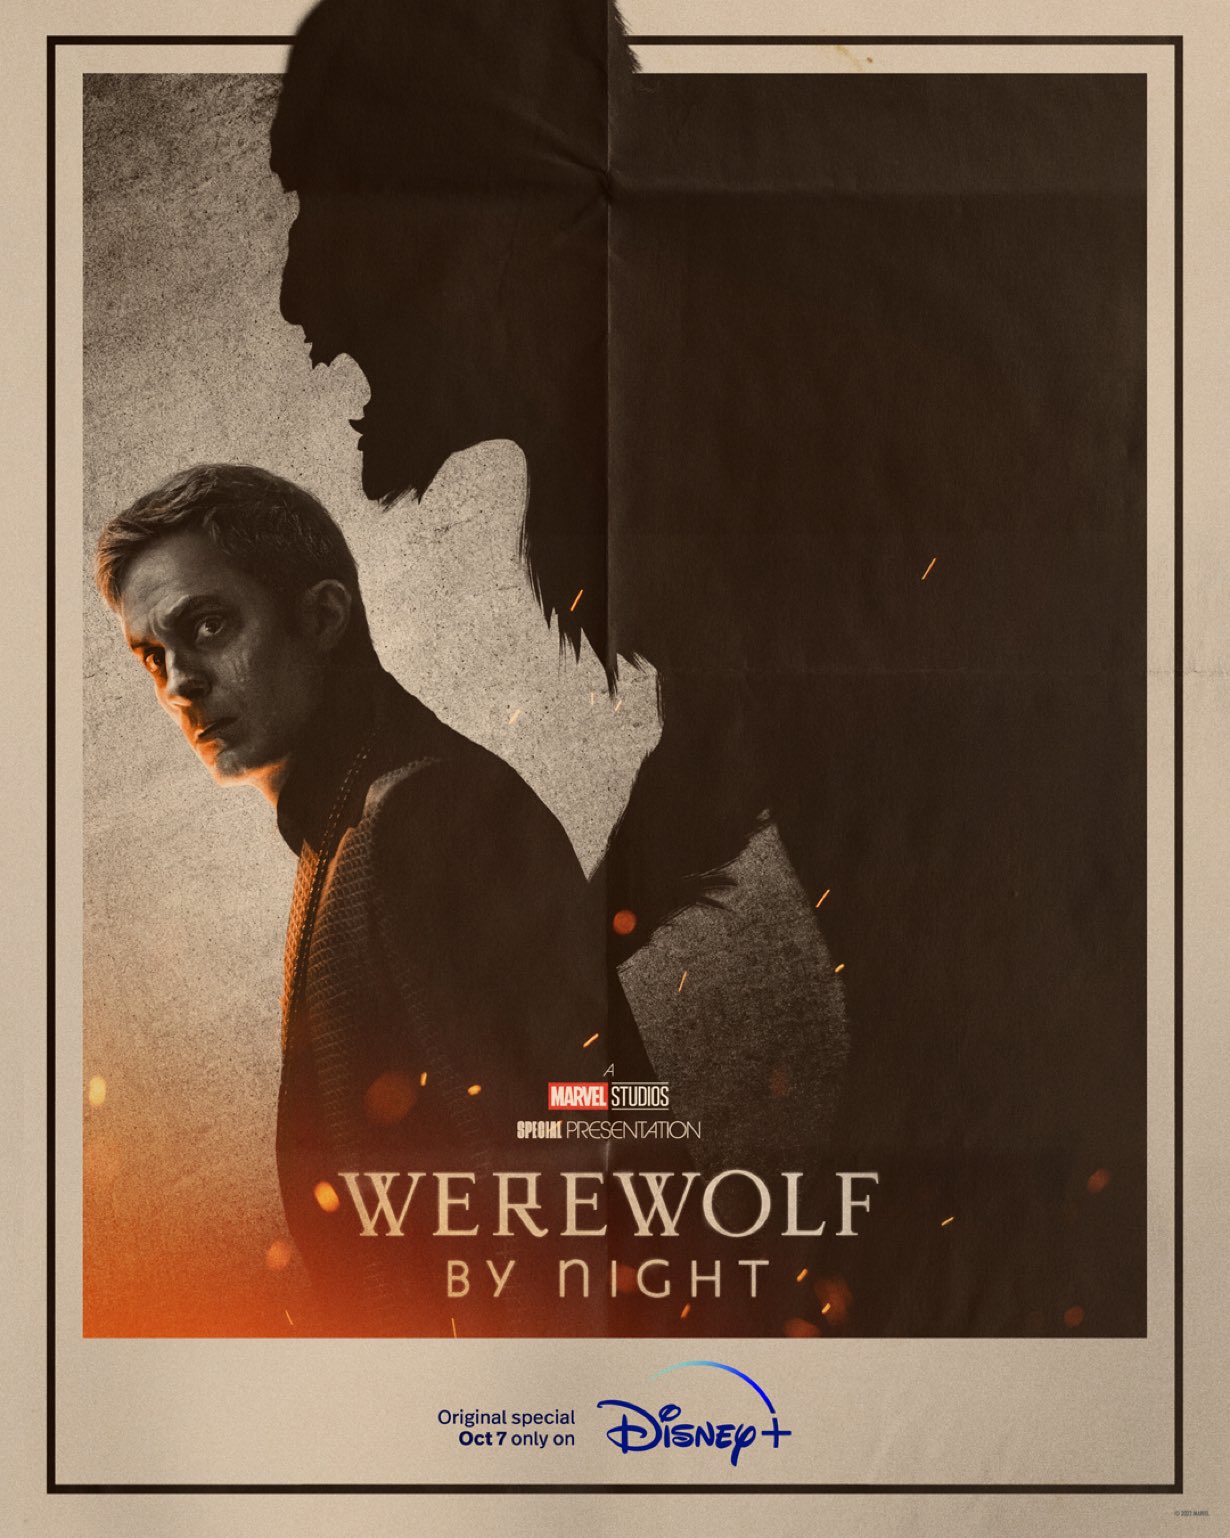 Gael Garcia Bernal and a monsterous shadow in the Werewolf By Night poster art.